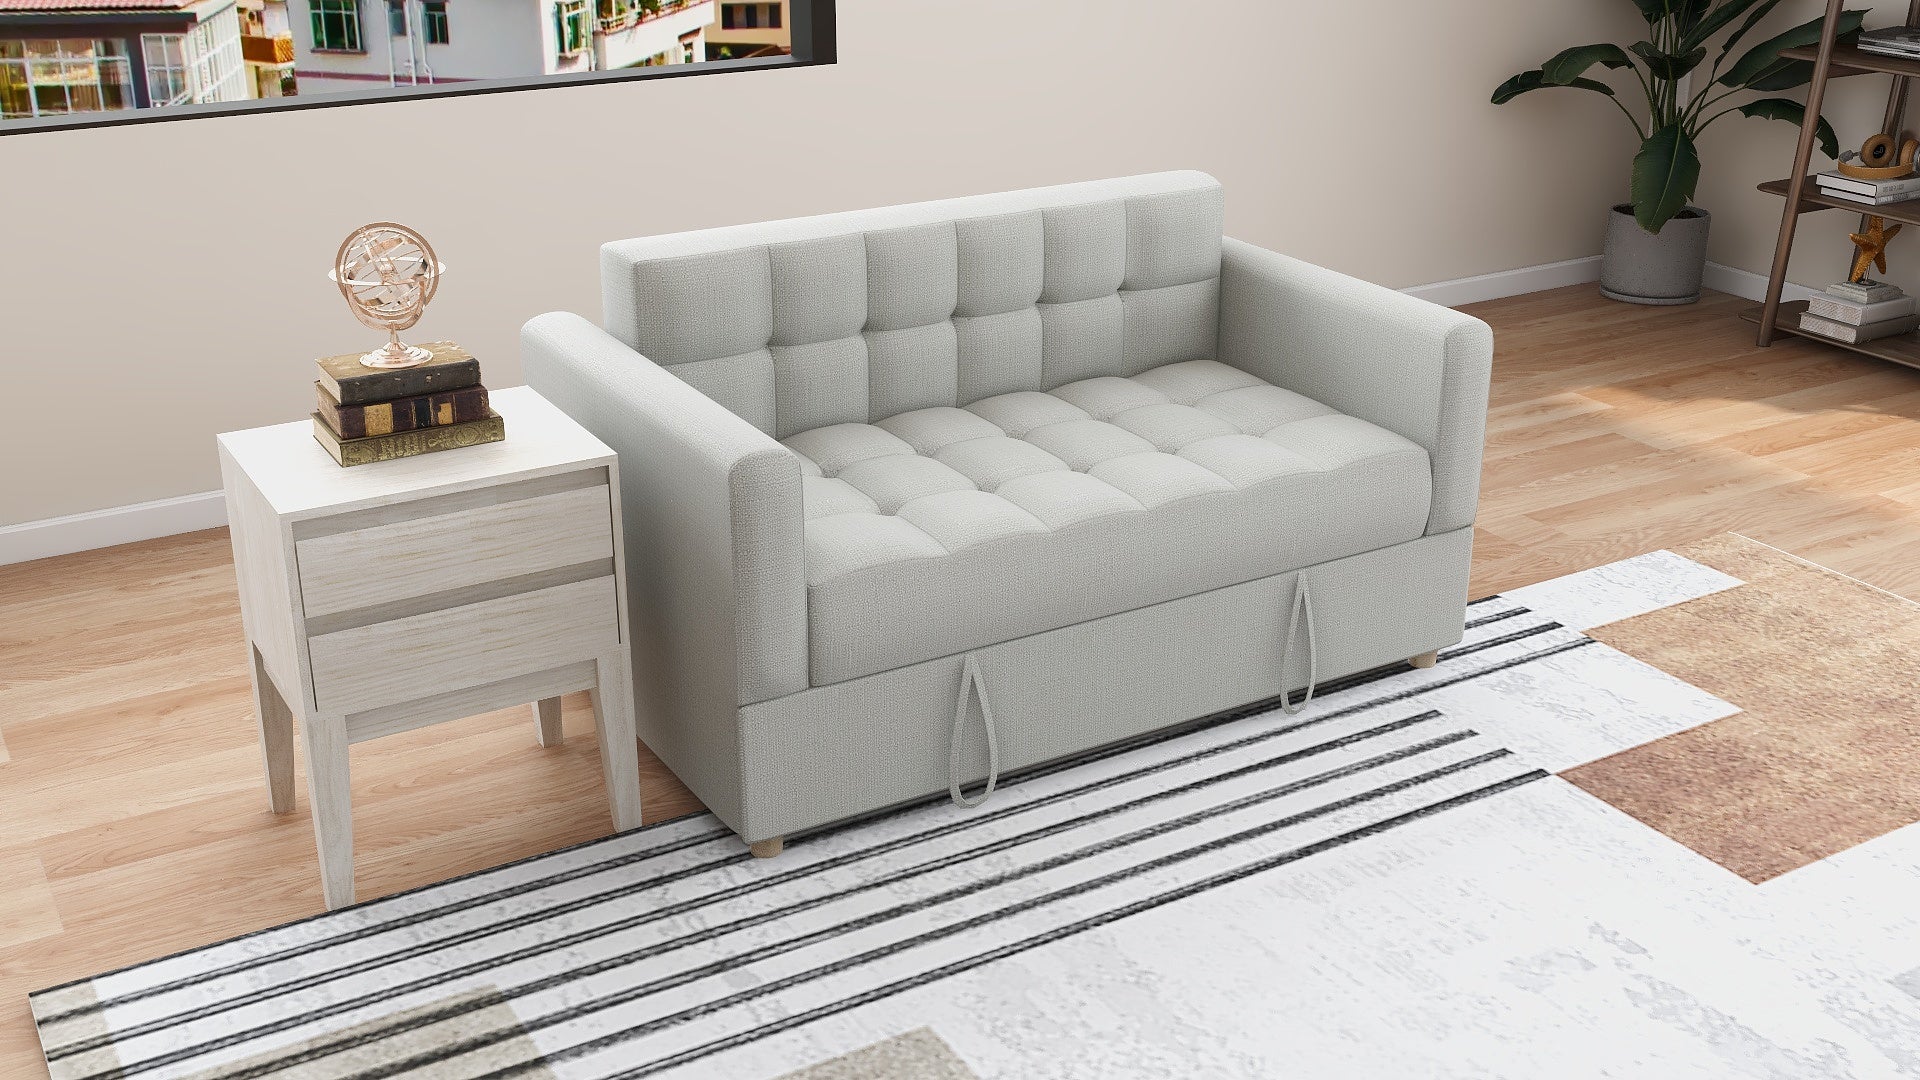 ESMERALD Pullout Fabric Sofa bed AF Home